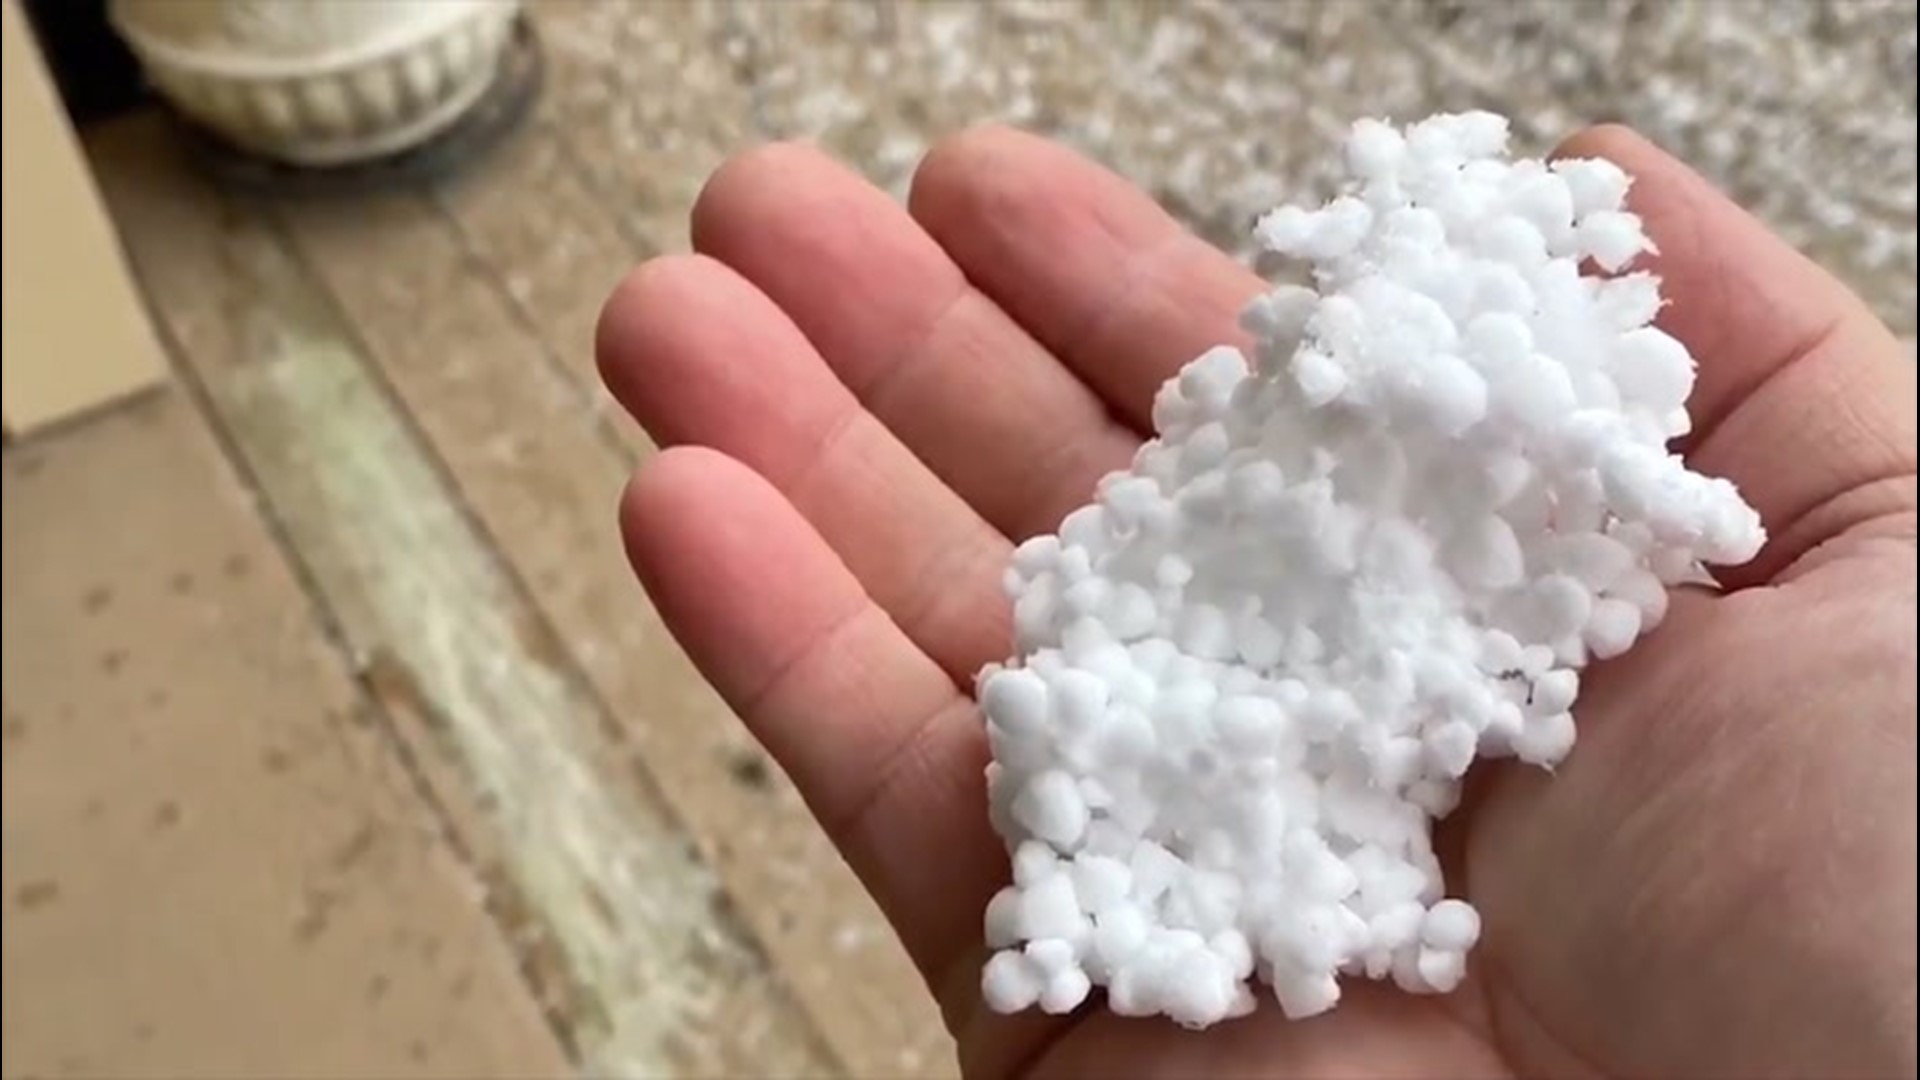 Twitter user @b_taunton learned about graupel when his home in Sylacauga, Alabama, was hit with a downpour on Jan. 13. The small balls form when supercooled water droplets freeze on falling snowflakes.